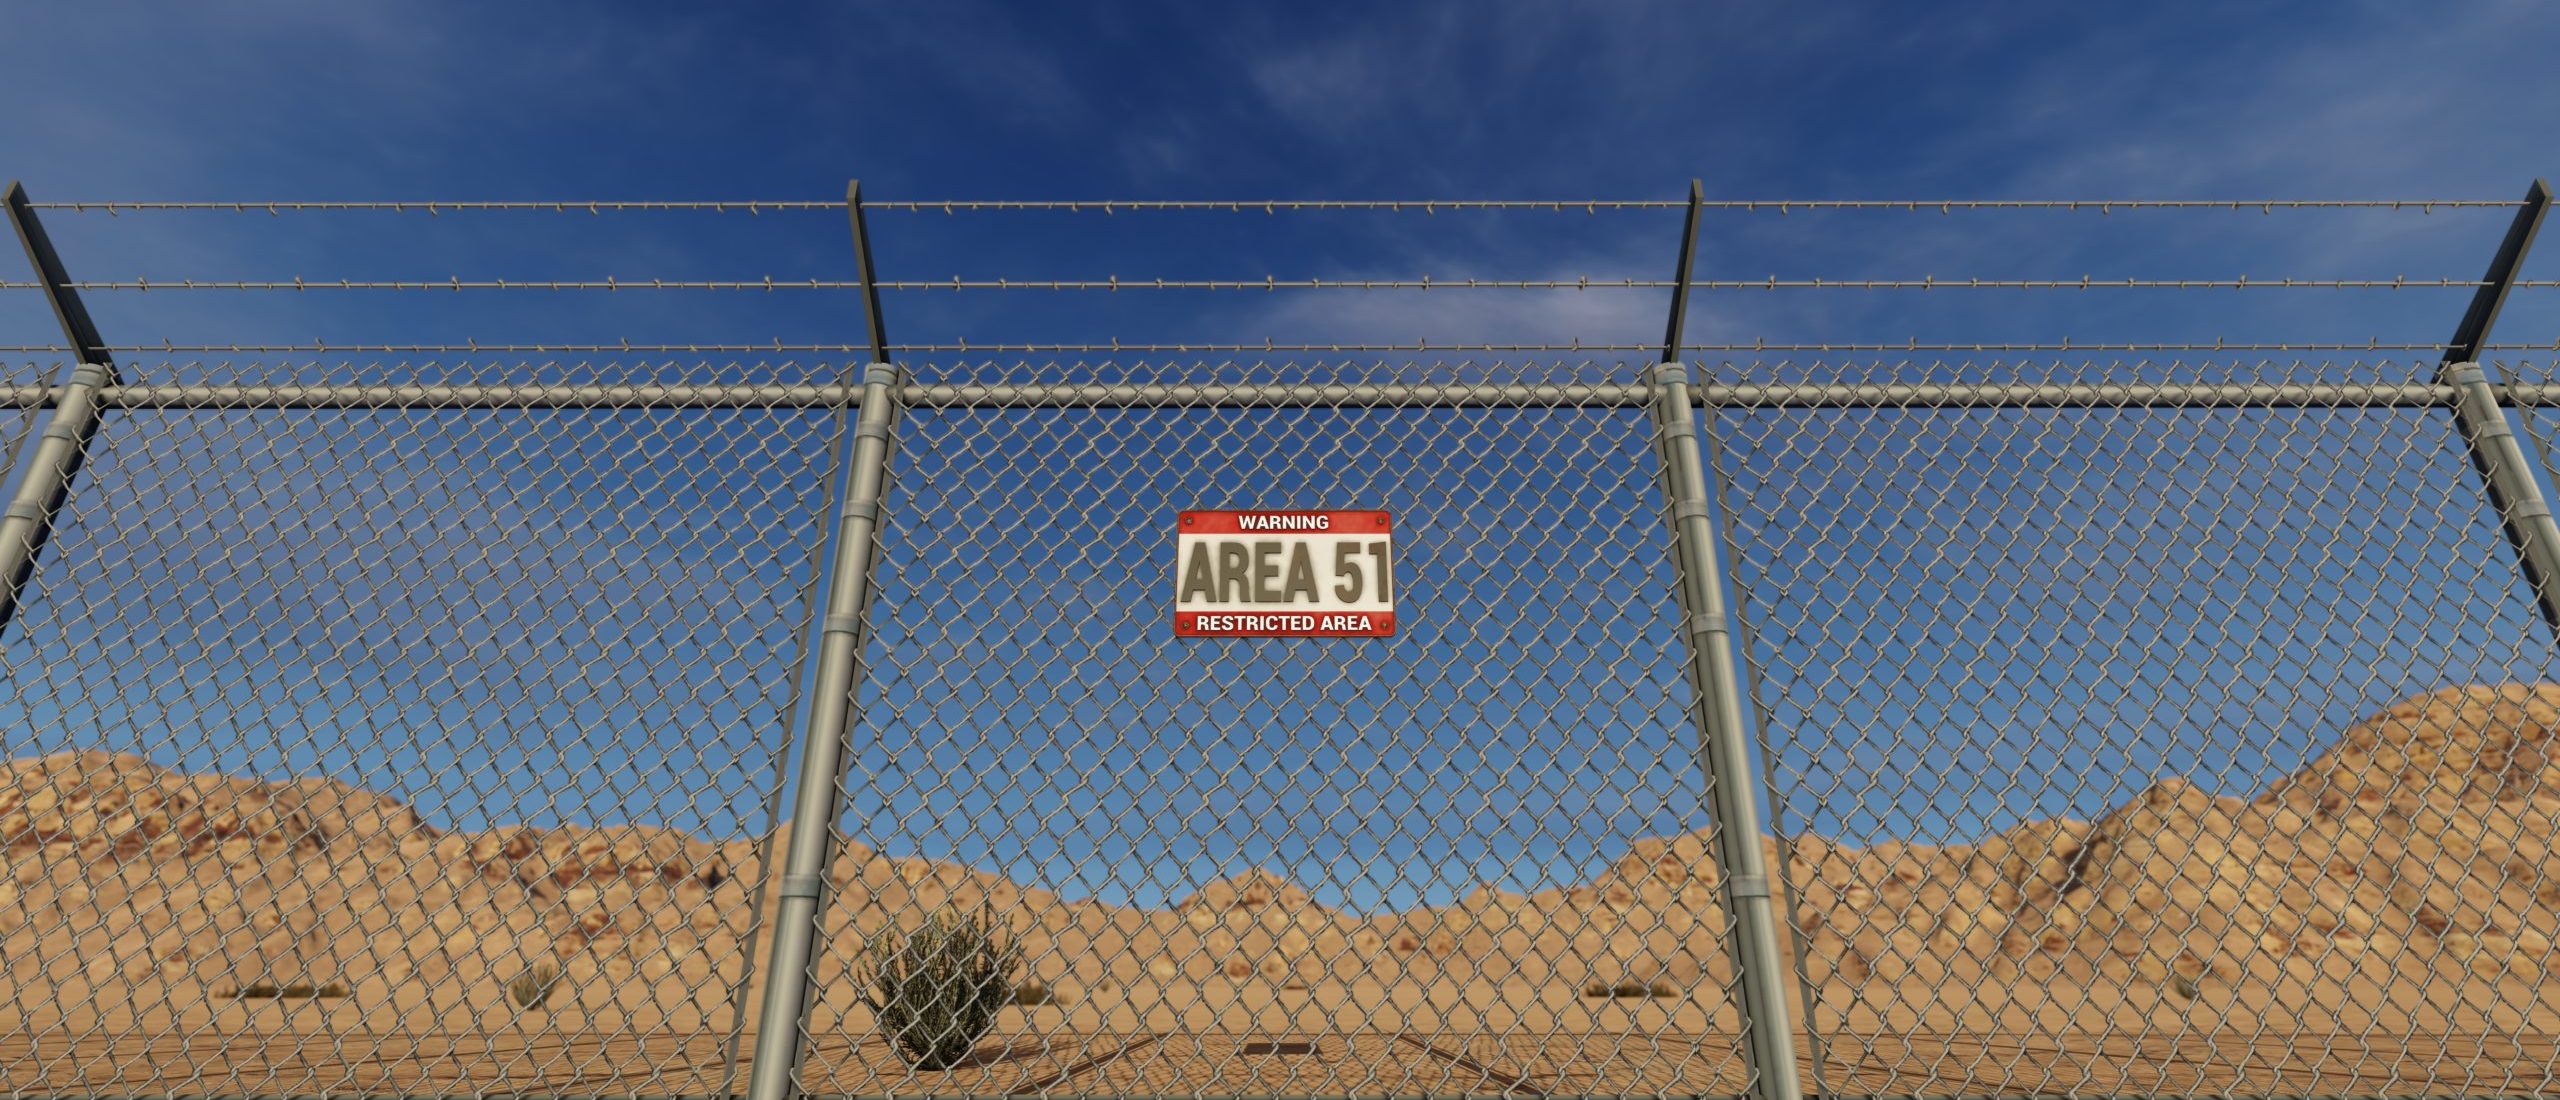 ‘Egg Shaped’ UFO Hidden At Area 51, Ex-Defense Contractor Claims